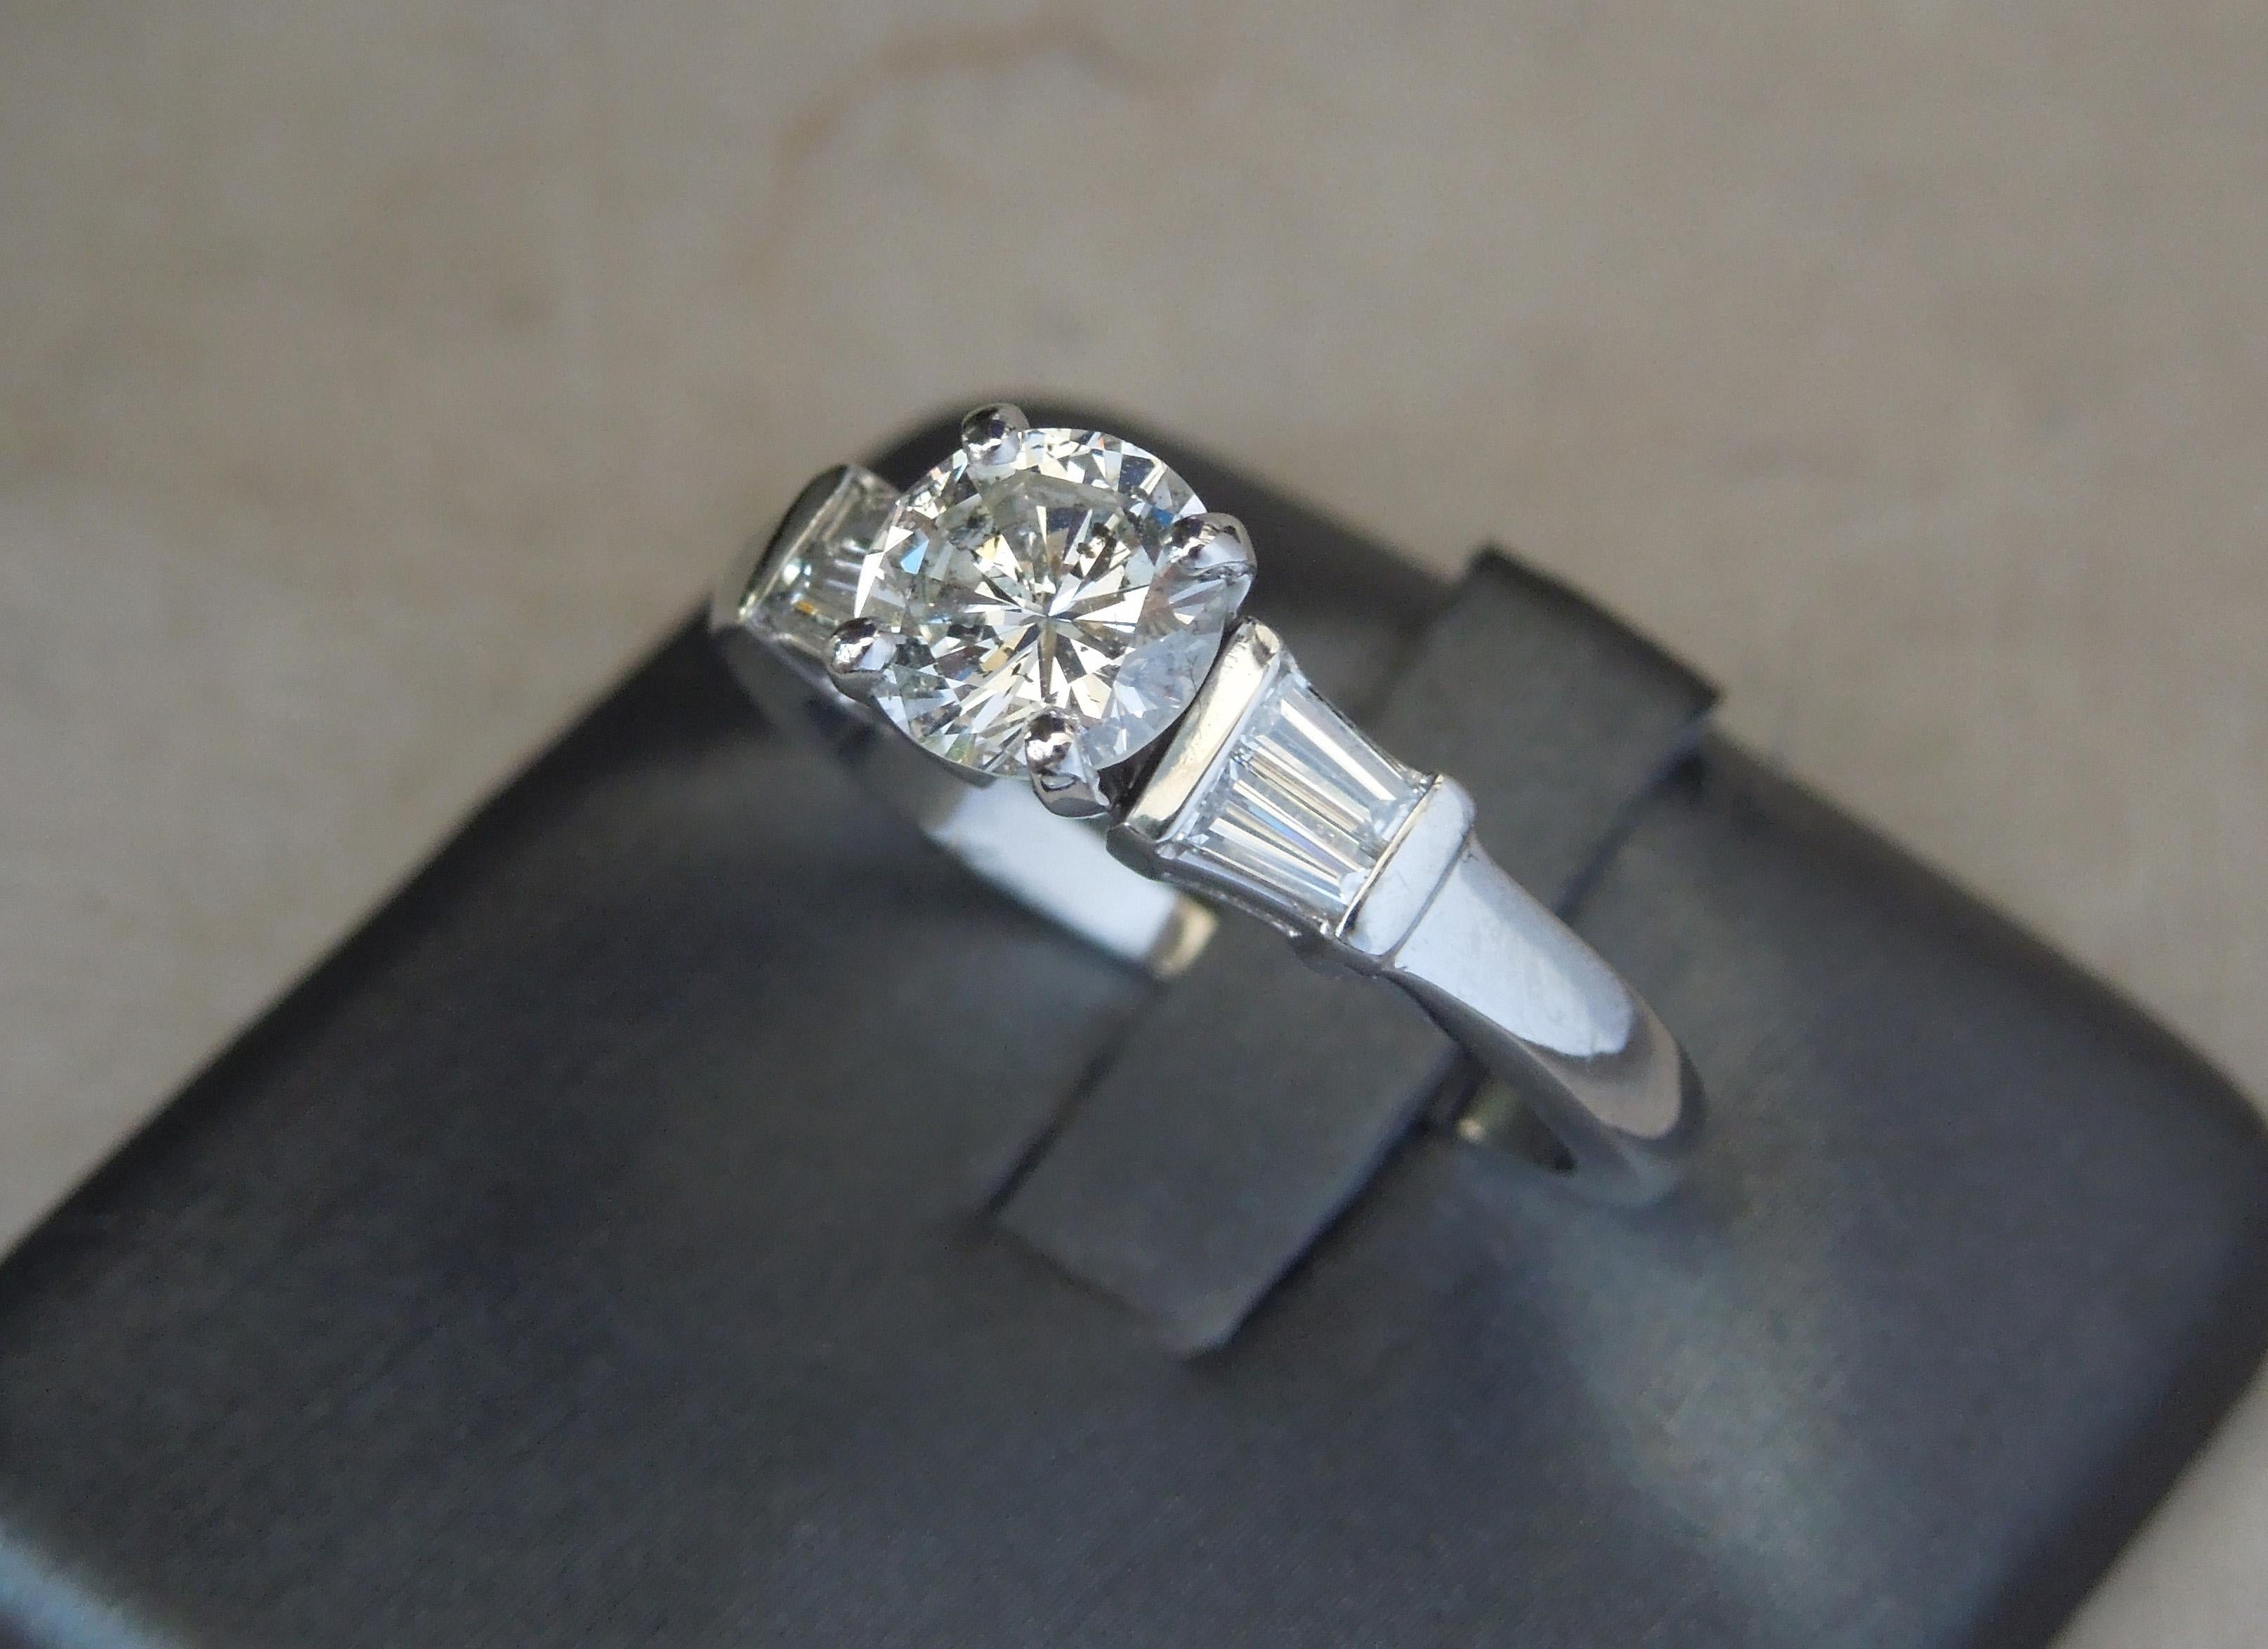 This Classic Platinum Diamond Solitaire features a central Brilliant cut 1.10 carat Diamond at 6.8mm in diameter, ranking an I-J Color & SI2 Clarity. [Although in the I-J range, the Diamond does face up as about a G Color appearing near colorless]